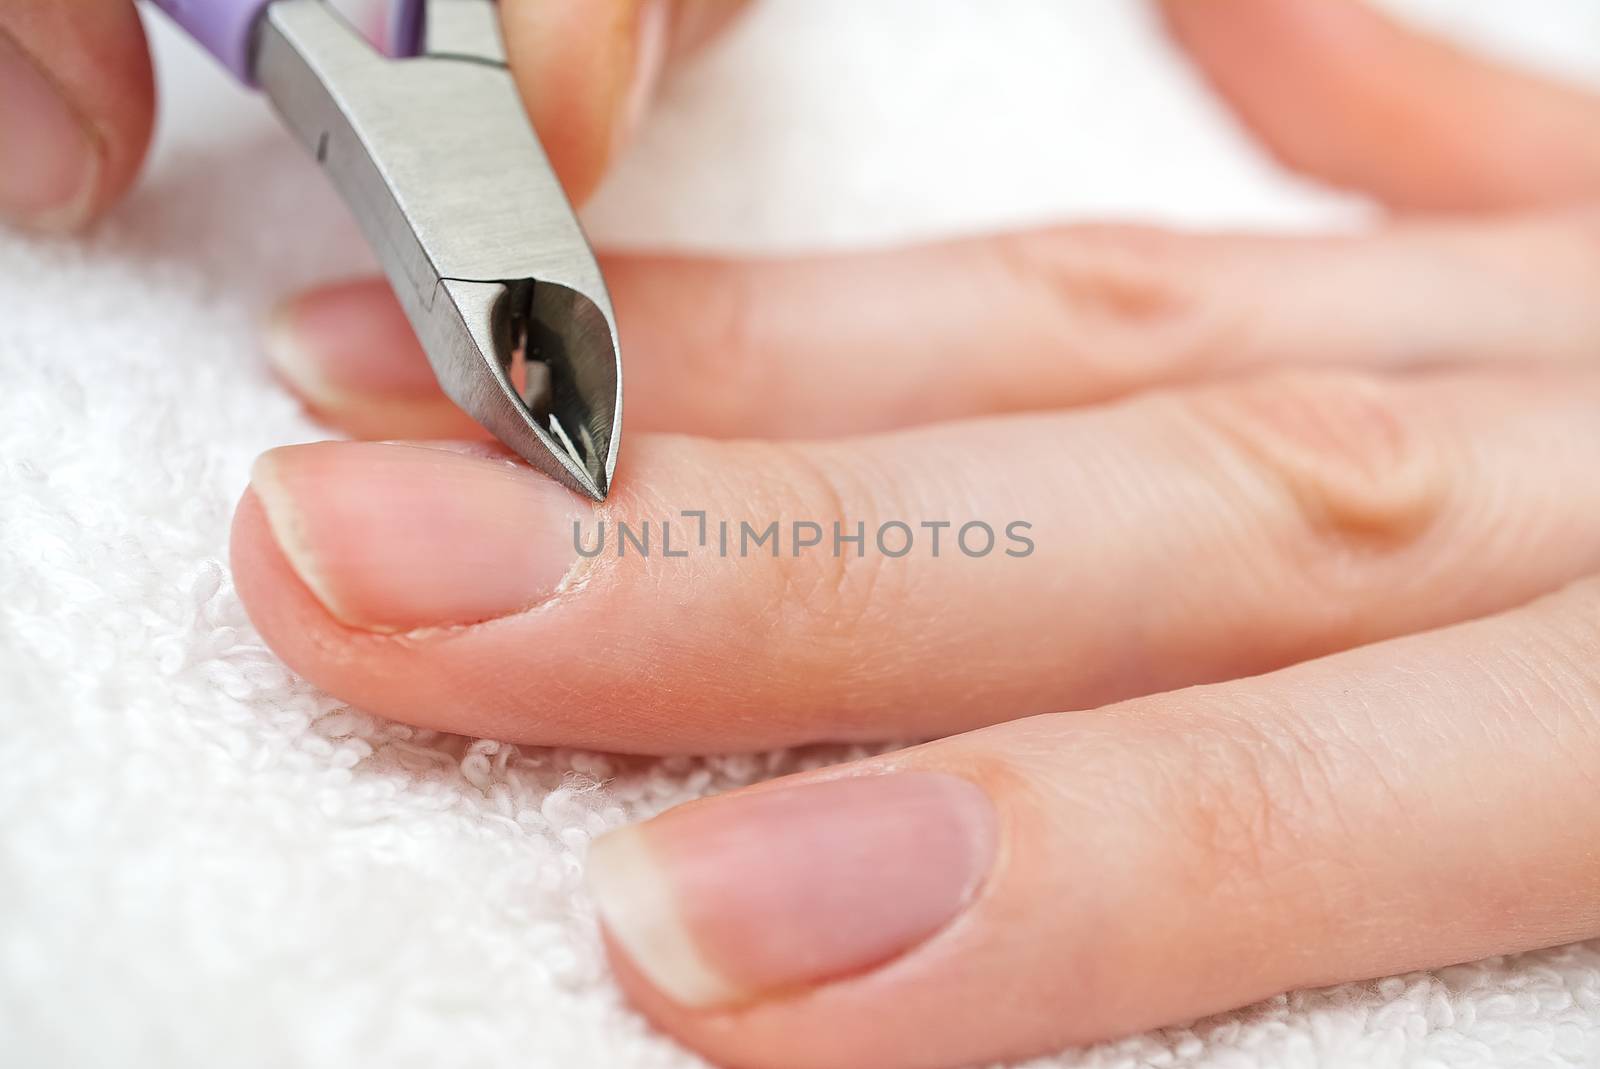 Nail Salon. Manicure process in beauty salon or at home. Closeup Of Female Hand With Healthy Natural Nails Getting Nail Care Procedure. Closeup Hands Removing Cuticles With Professional Nail Tool